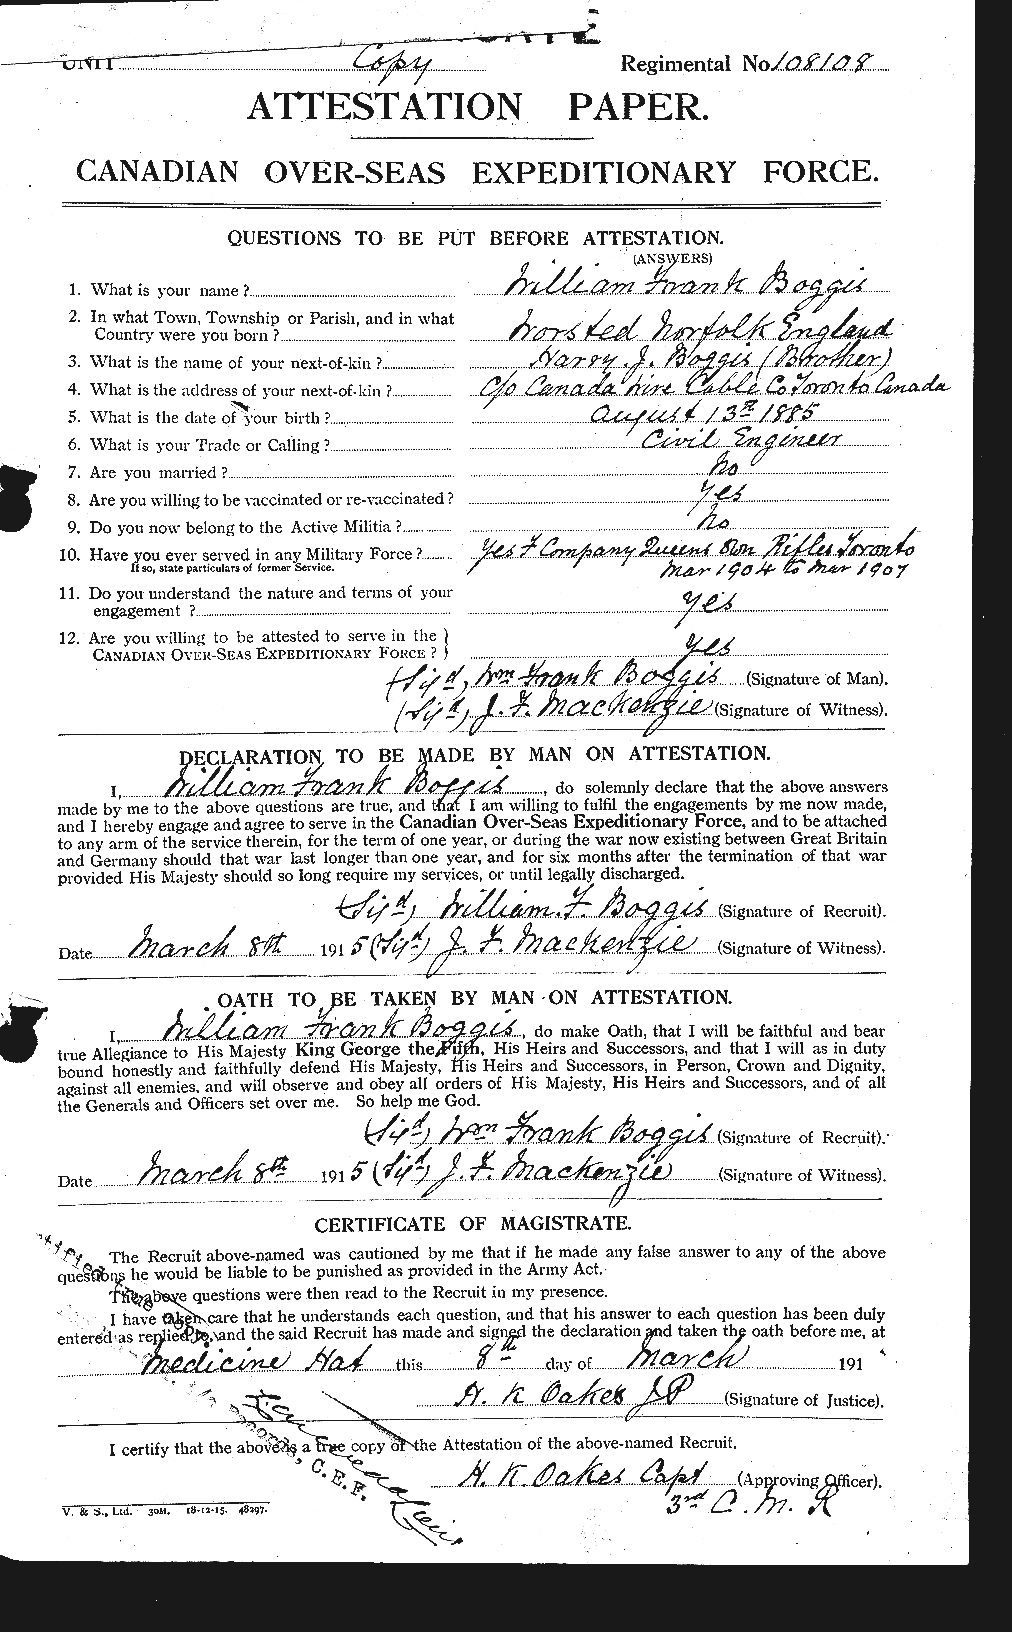 Personnel Records of the First World War - CEF 249238a